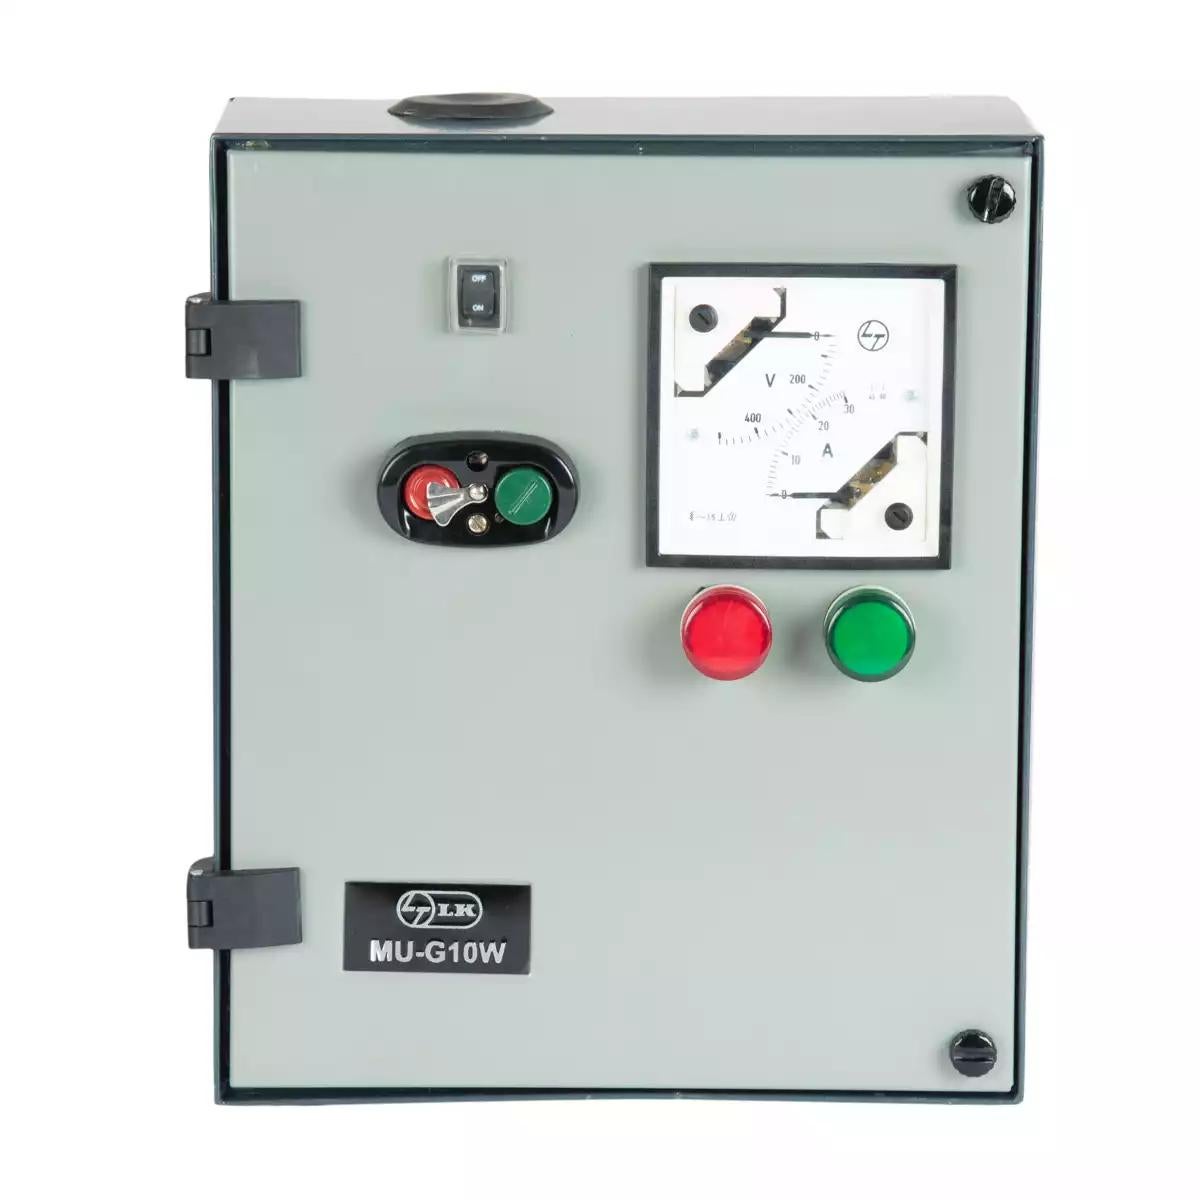 Three Phase DOL Controller with WLC for Submersible Pump Application,MU-G10W,7.5 HP,DOL, CS91037DOAO